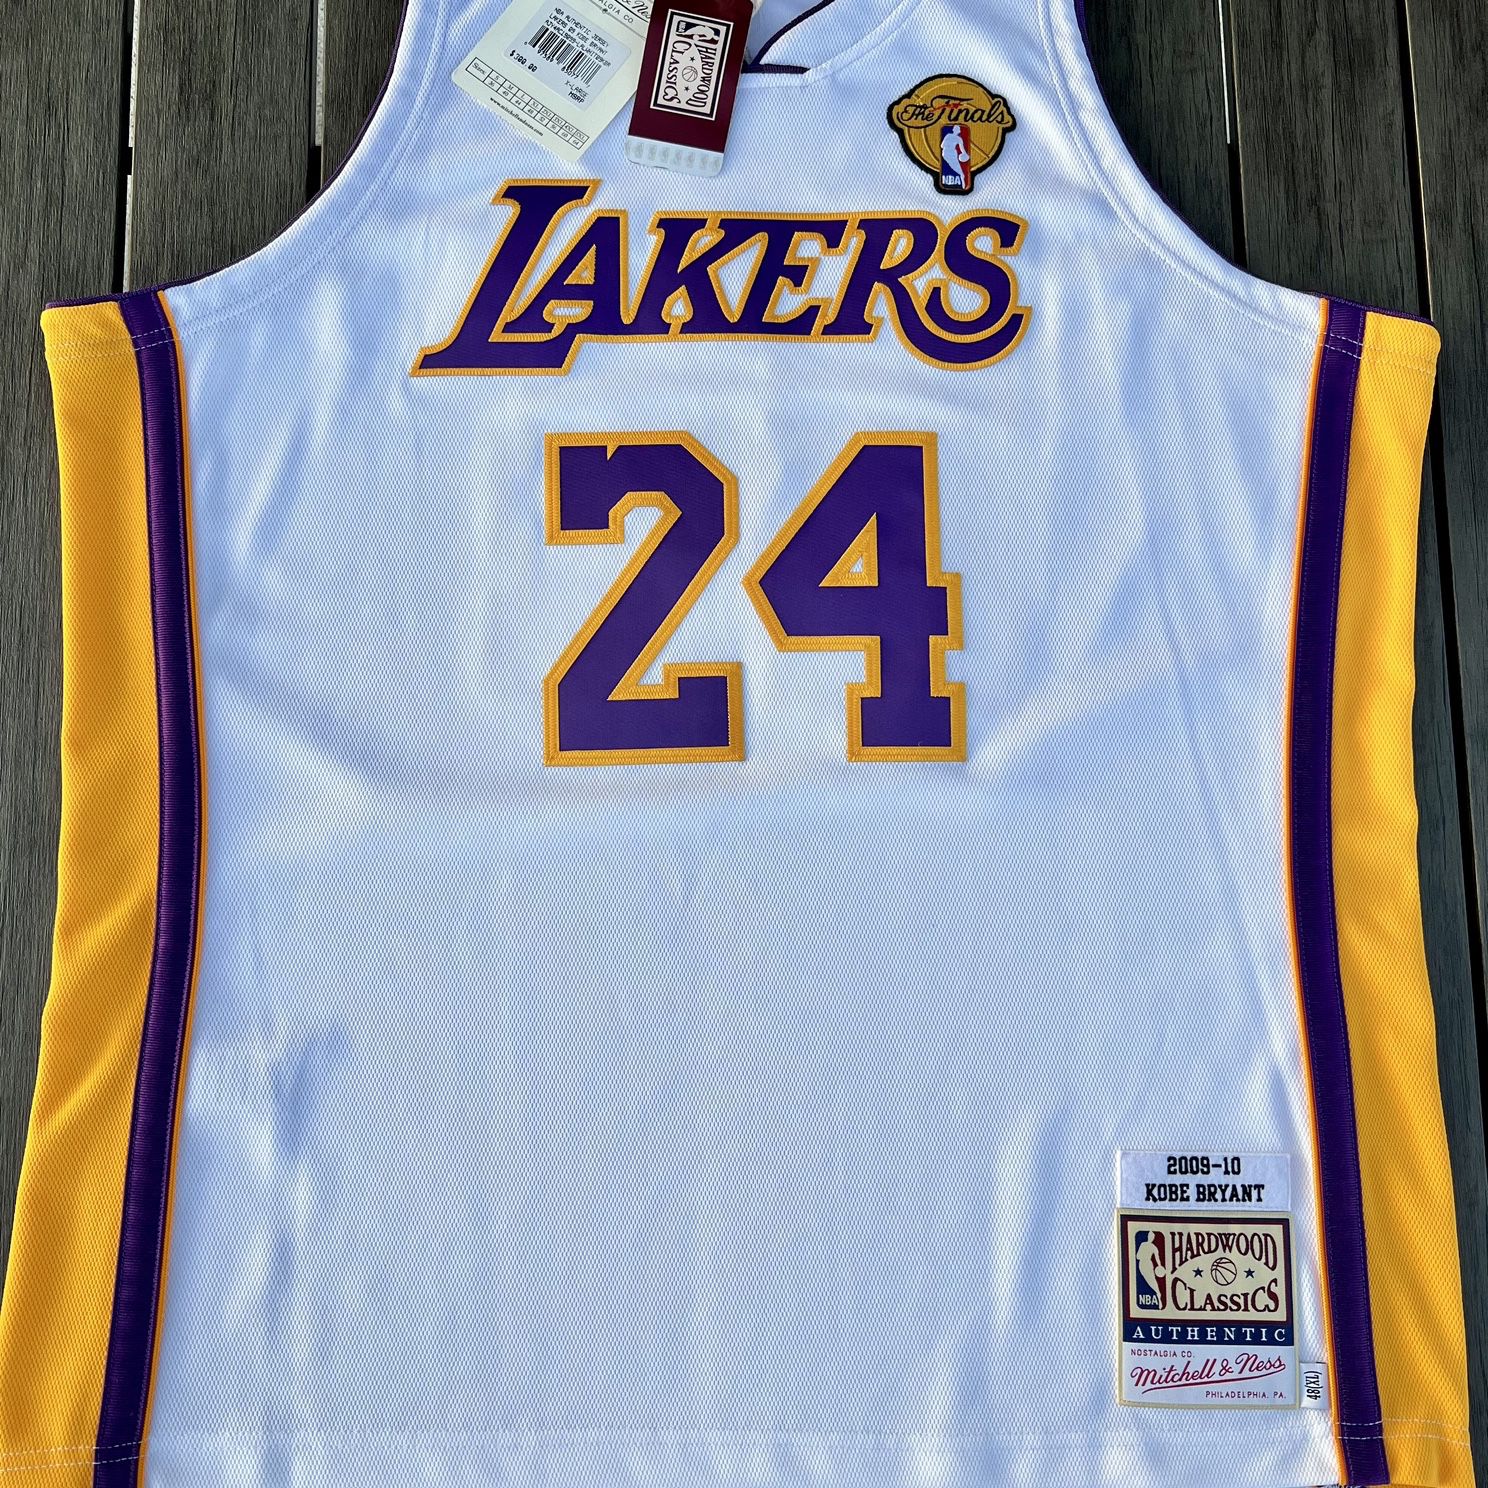 Authentic Michell & Ness Kobe Bryant Jersey in new condition. for